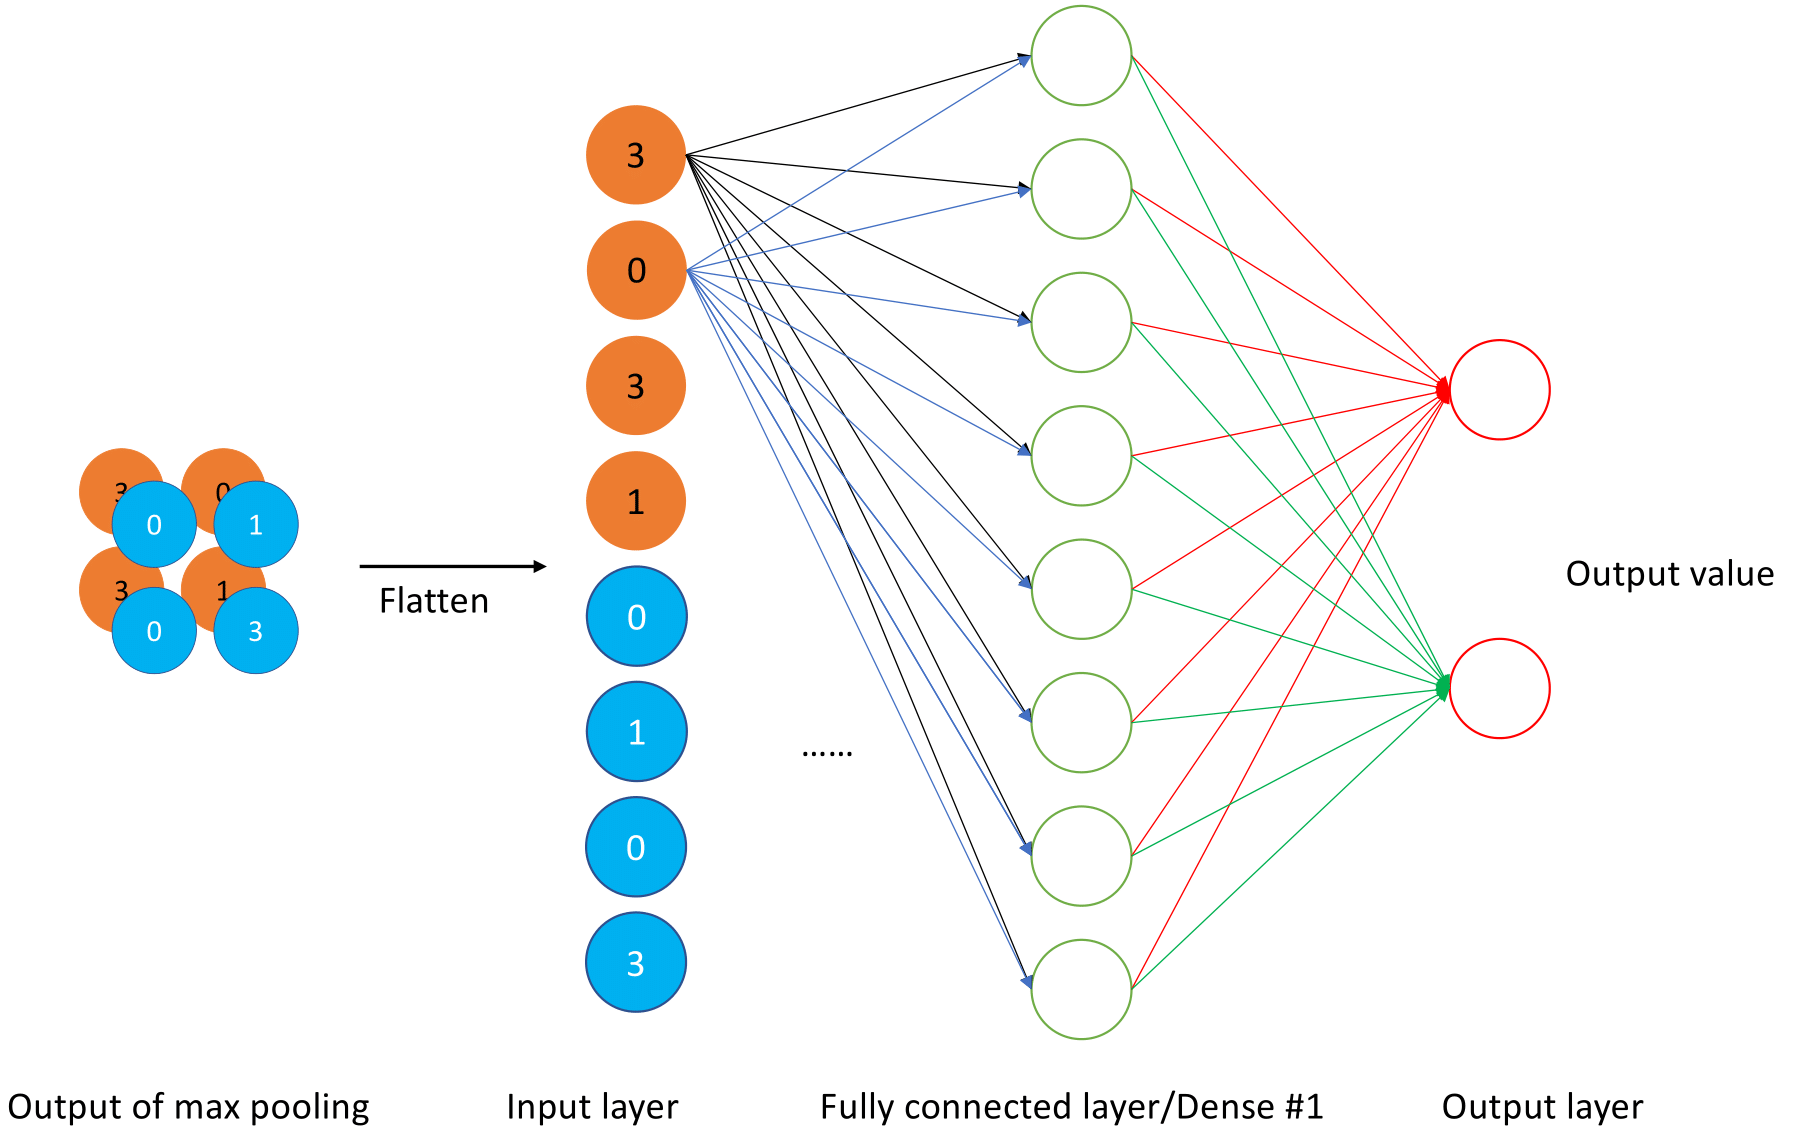 Basic operational structure of the fully connected layer